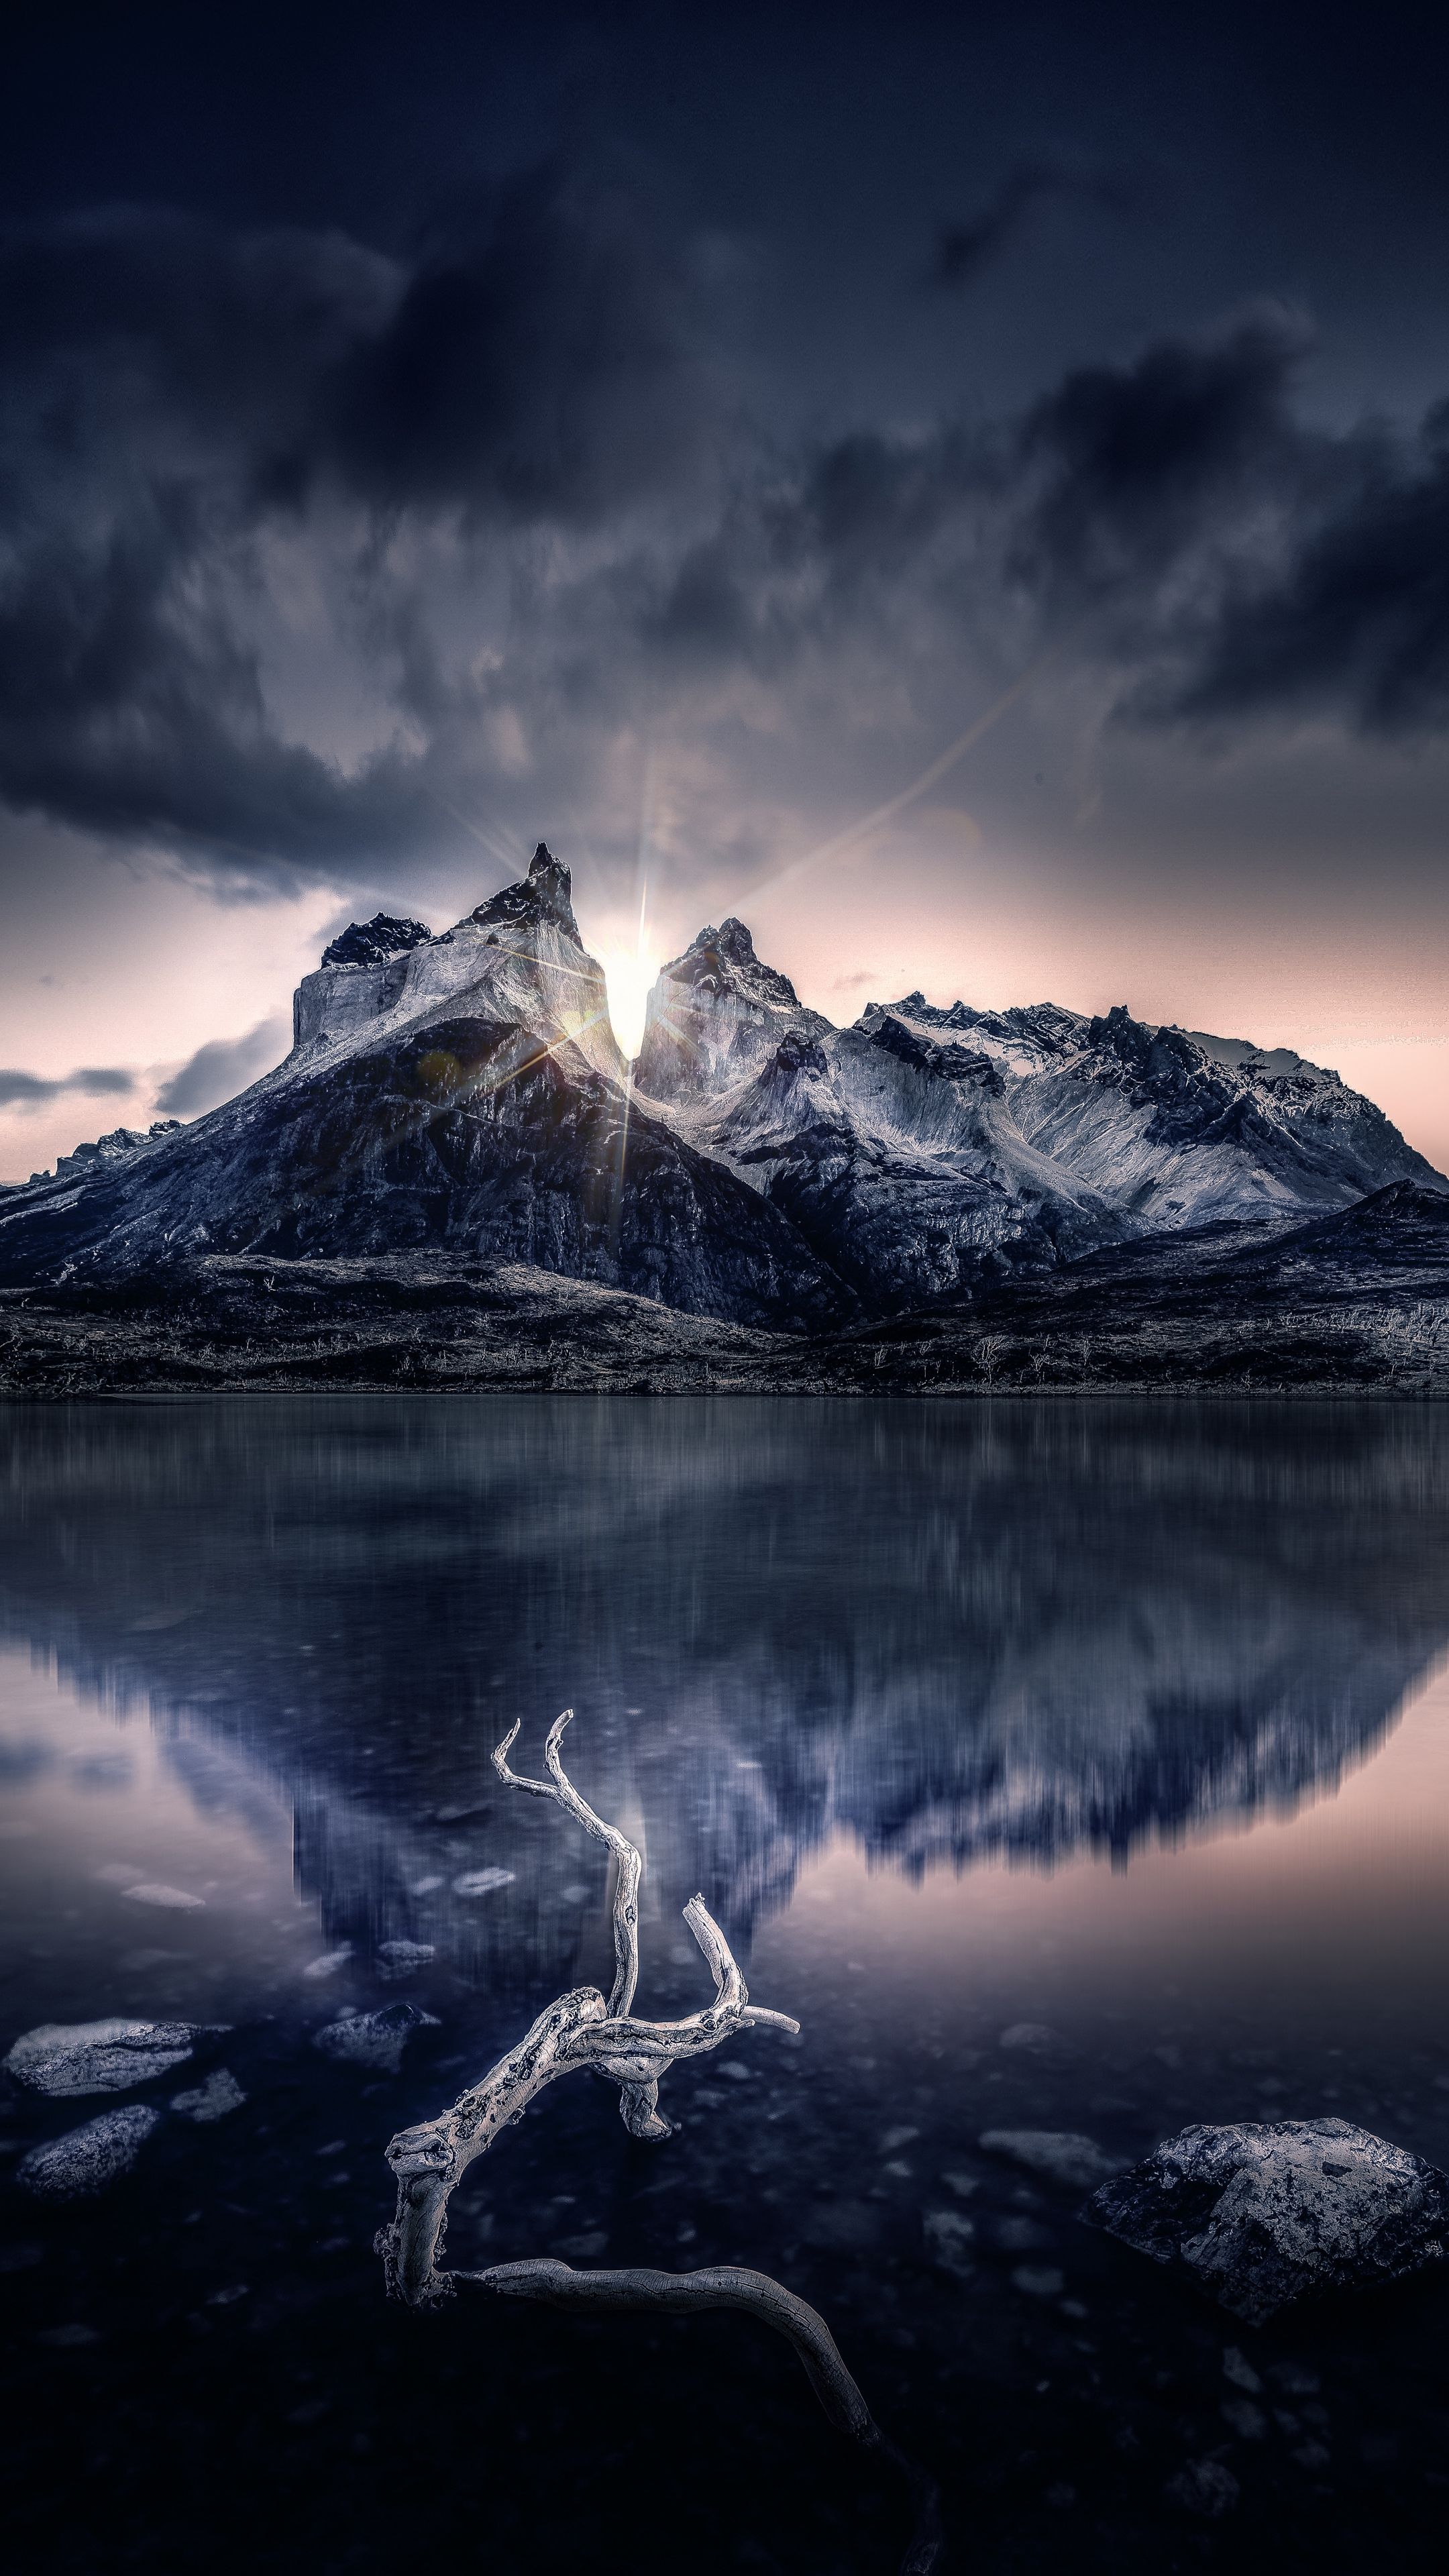 4k wallpapers for android,nature,natural landscape,sky,mountain,mountainous landforms